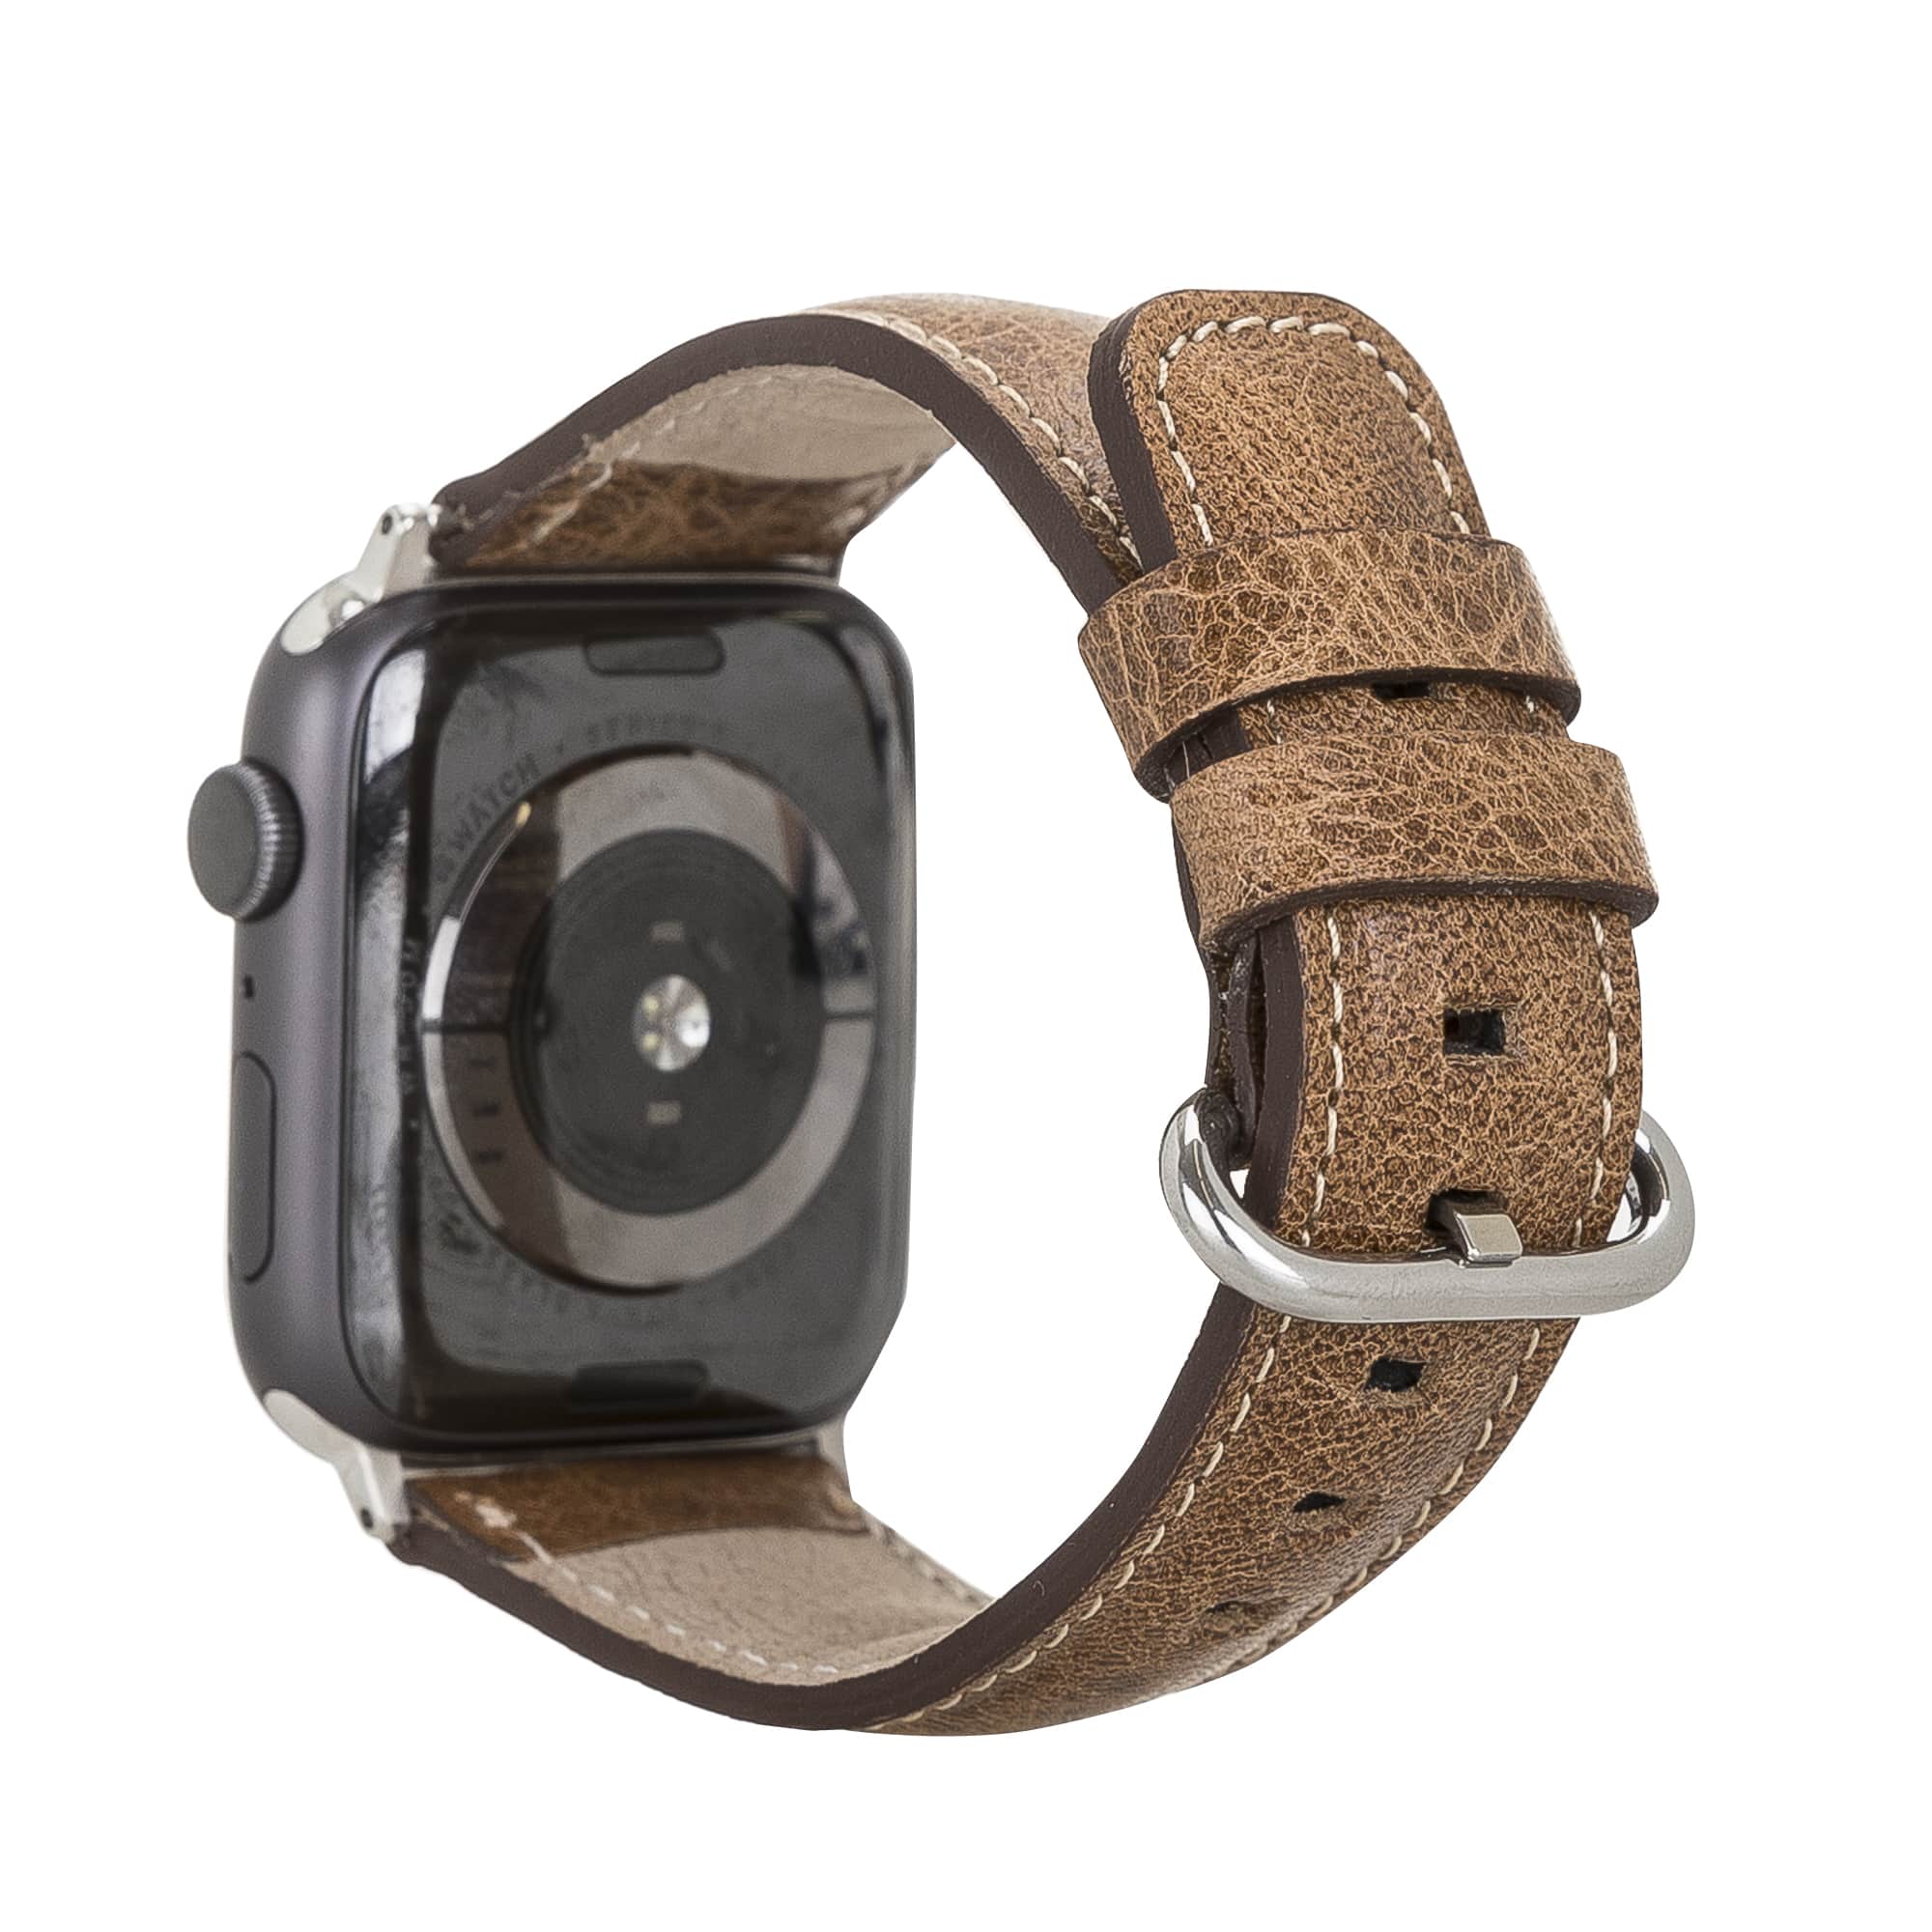 Birmingham Classic Brown Leather Apple Watch Band Strap 38mm 40mm 42mm 44mm 45mm for All Series - Bomonti - 2